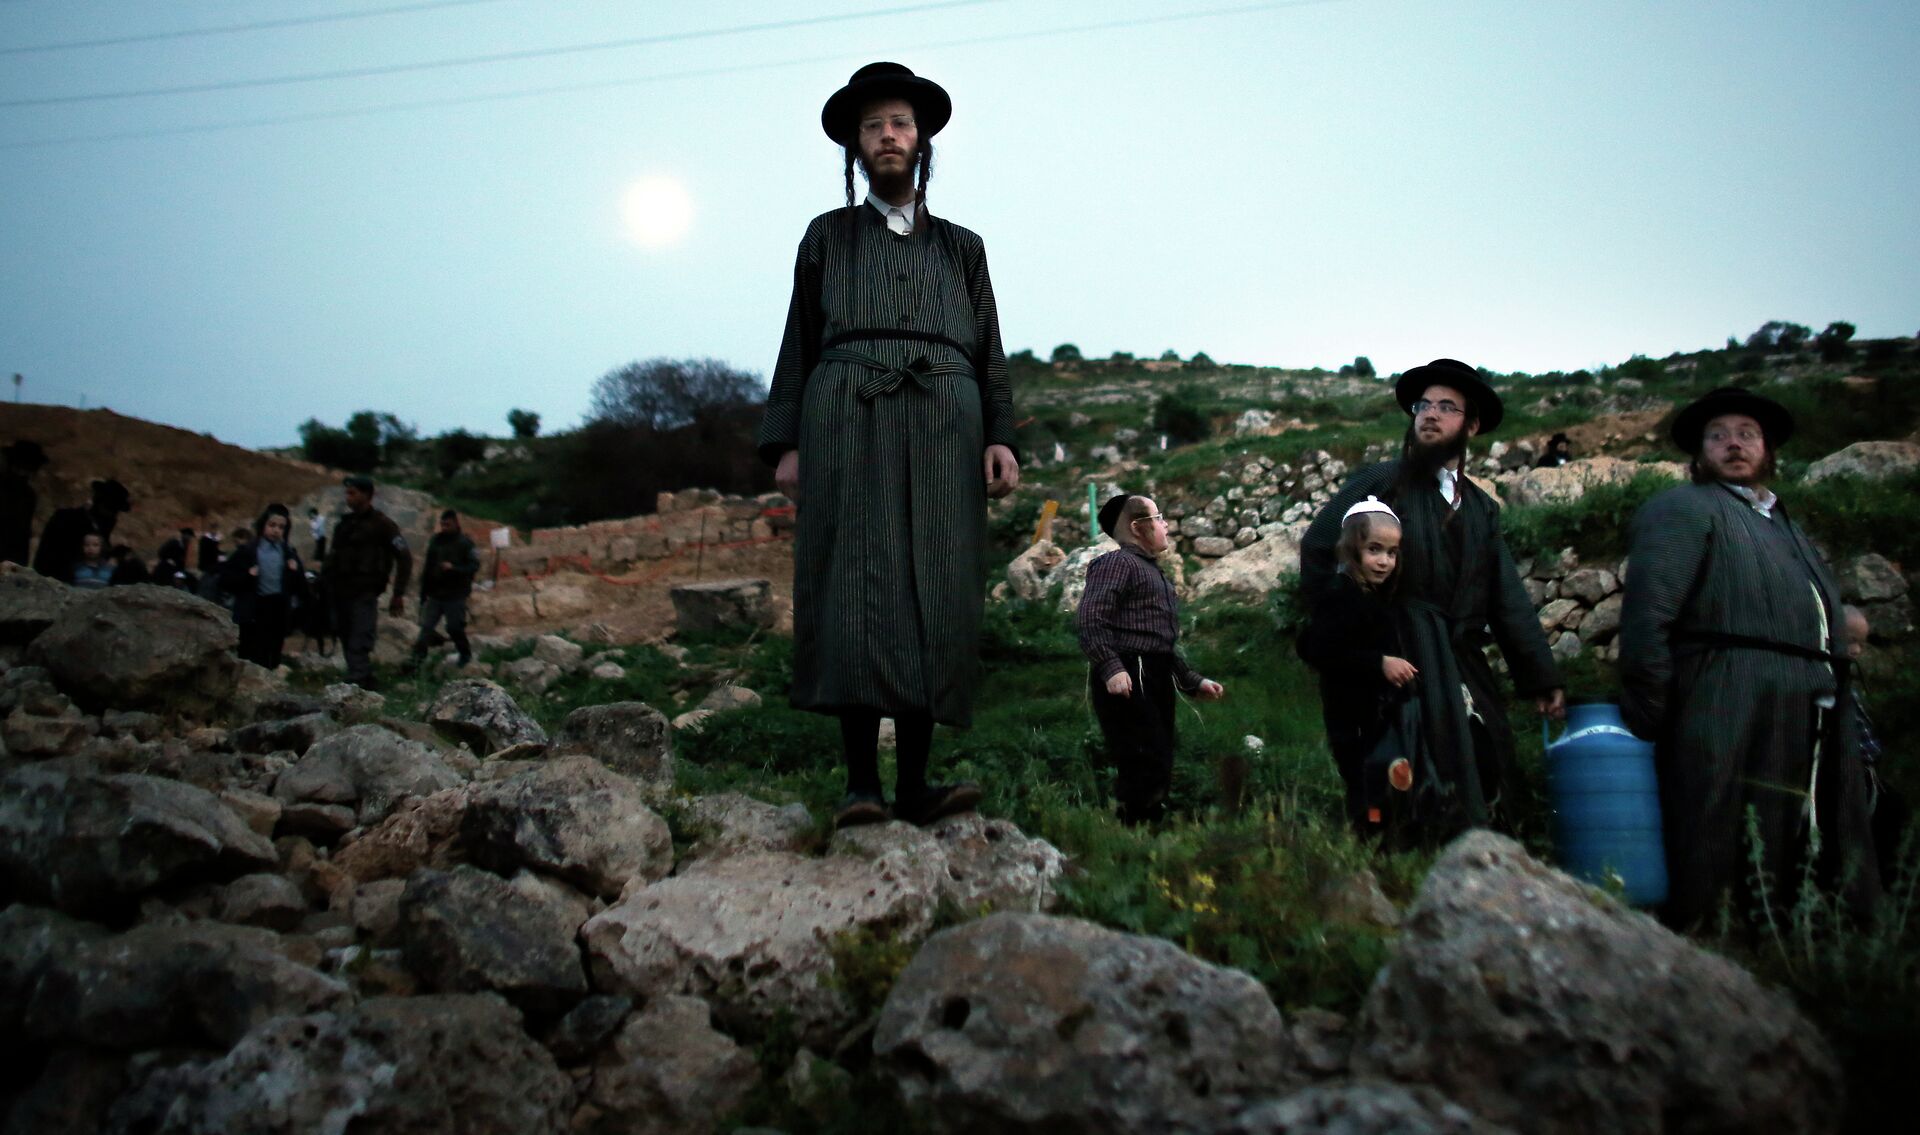 Ultra-Orthodox Jews leave the site after collecting water from a mountain spring near Jerusalem to be used in baking unleavened bread, known as Matzoth, during the Maim Shelanu (Rested Water) ceremony on April 2, 2015. - Sputnik International, 1920, 27.07.2022